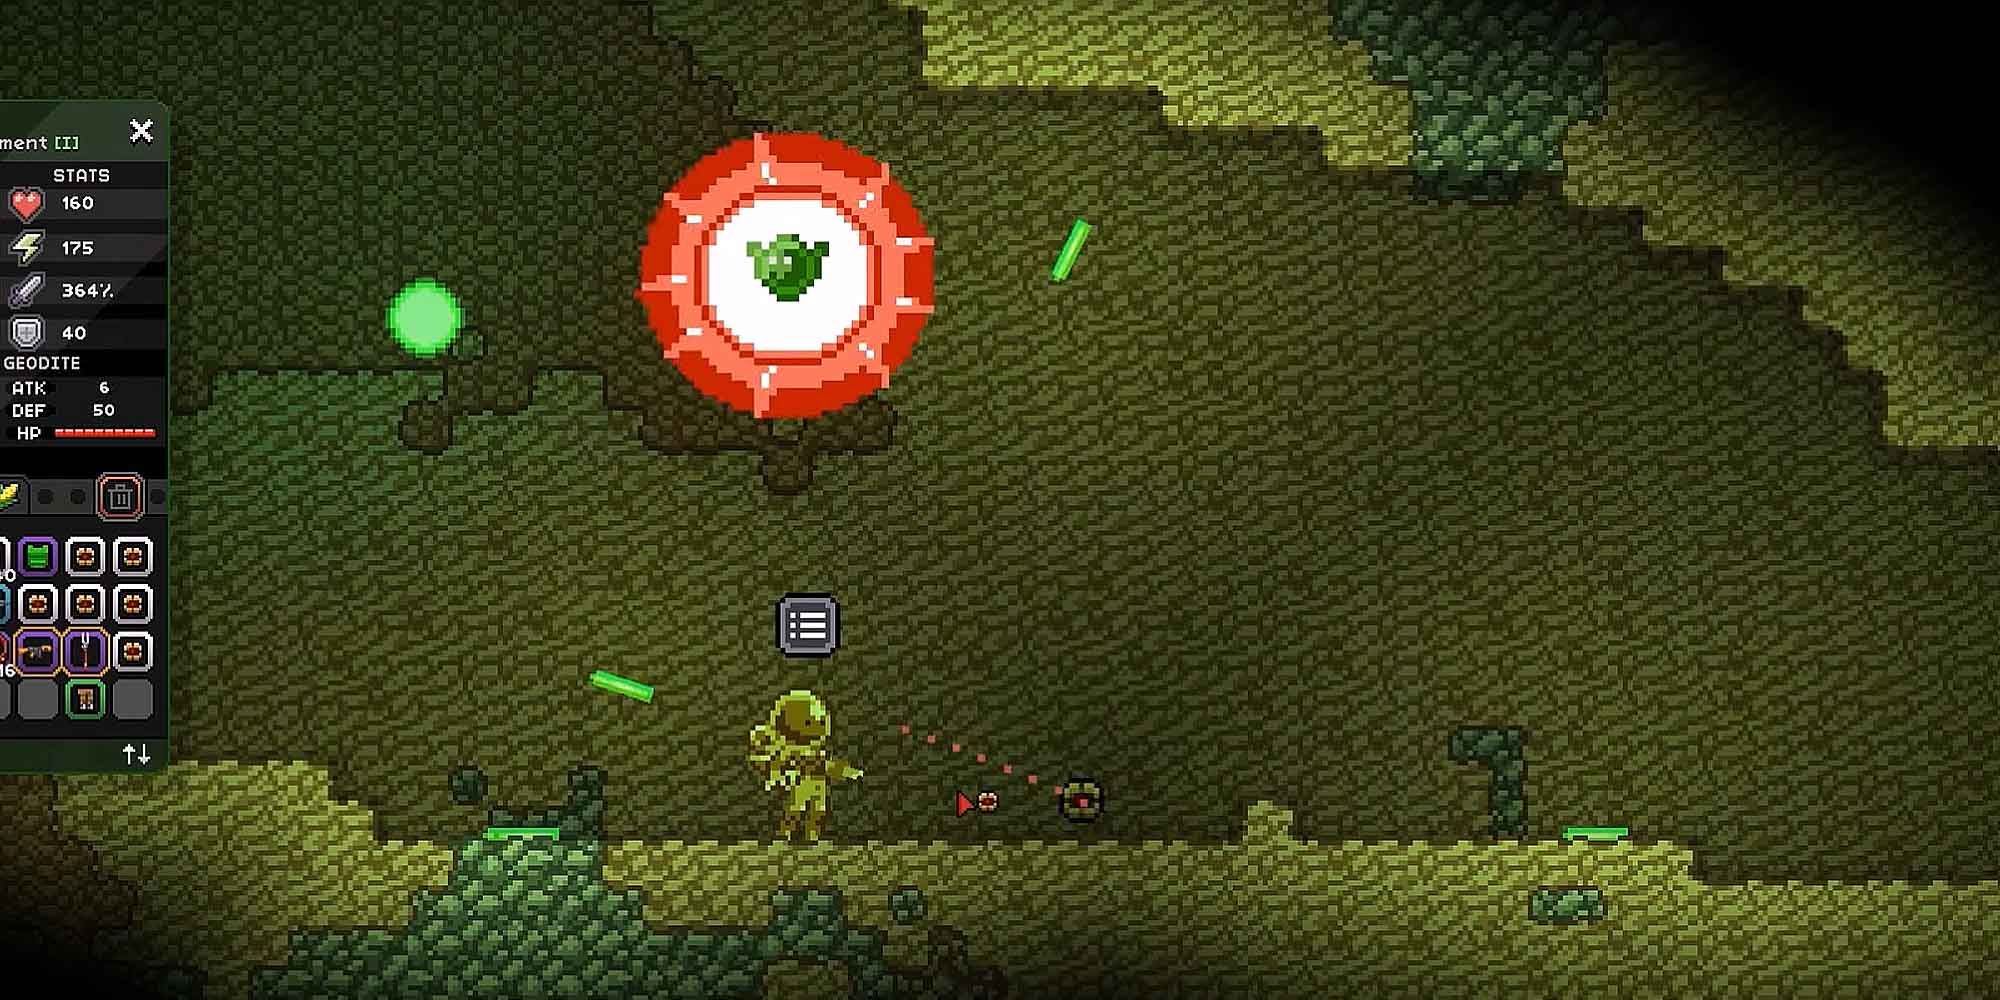 The Glowing Ball creature in Starbound